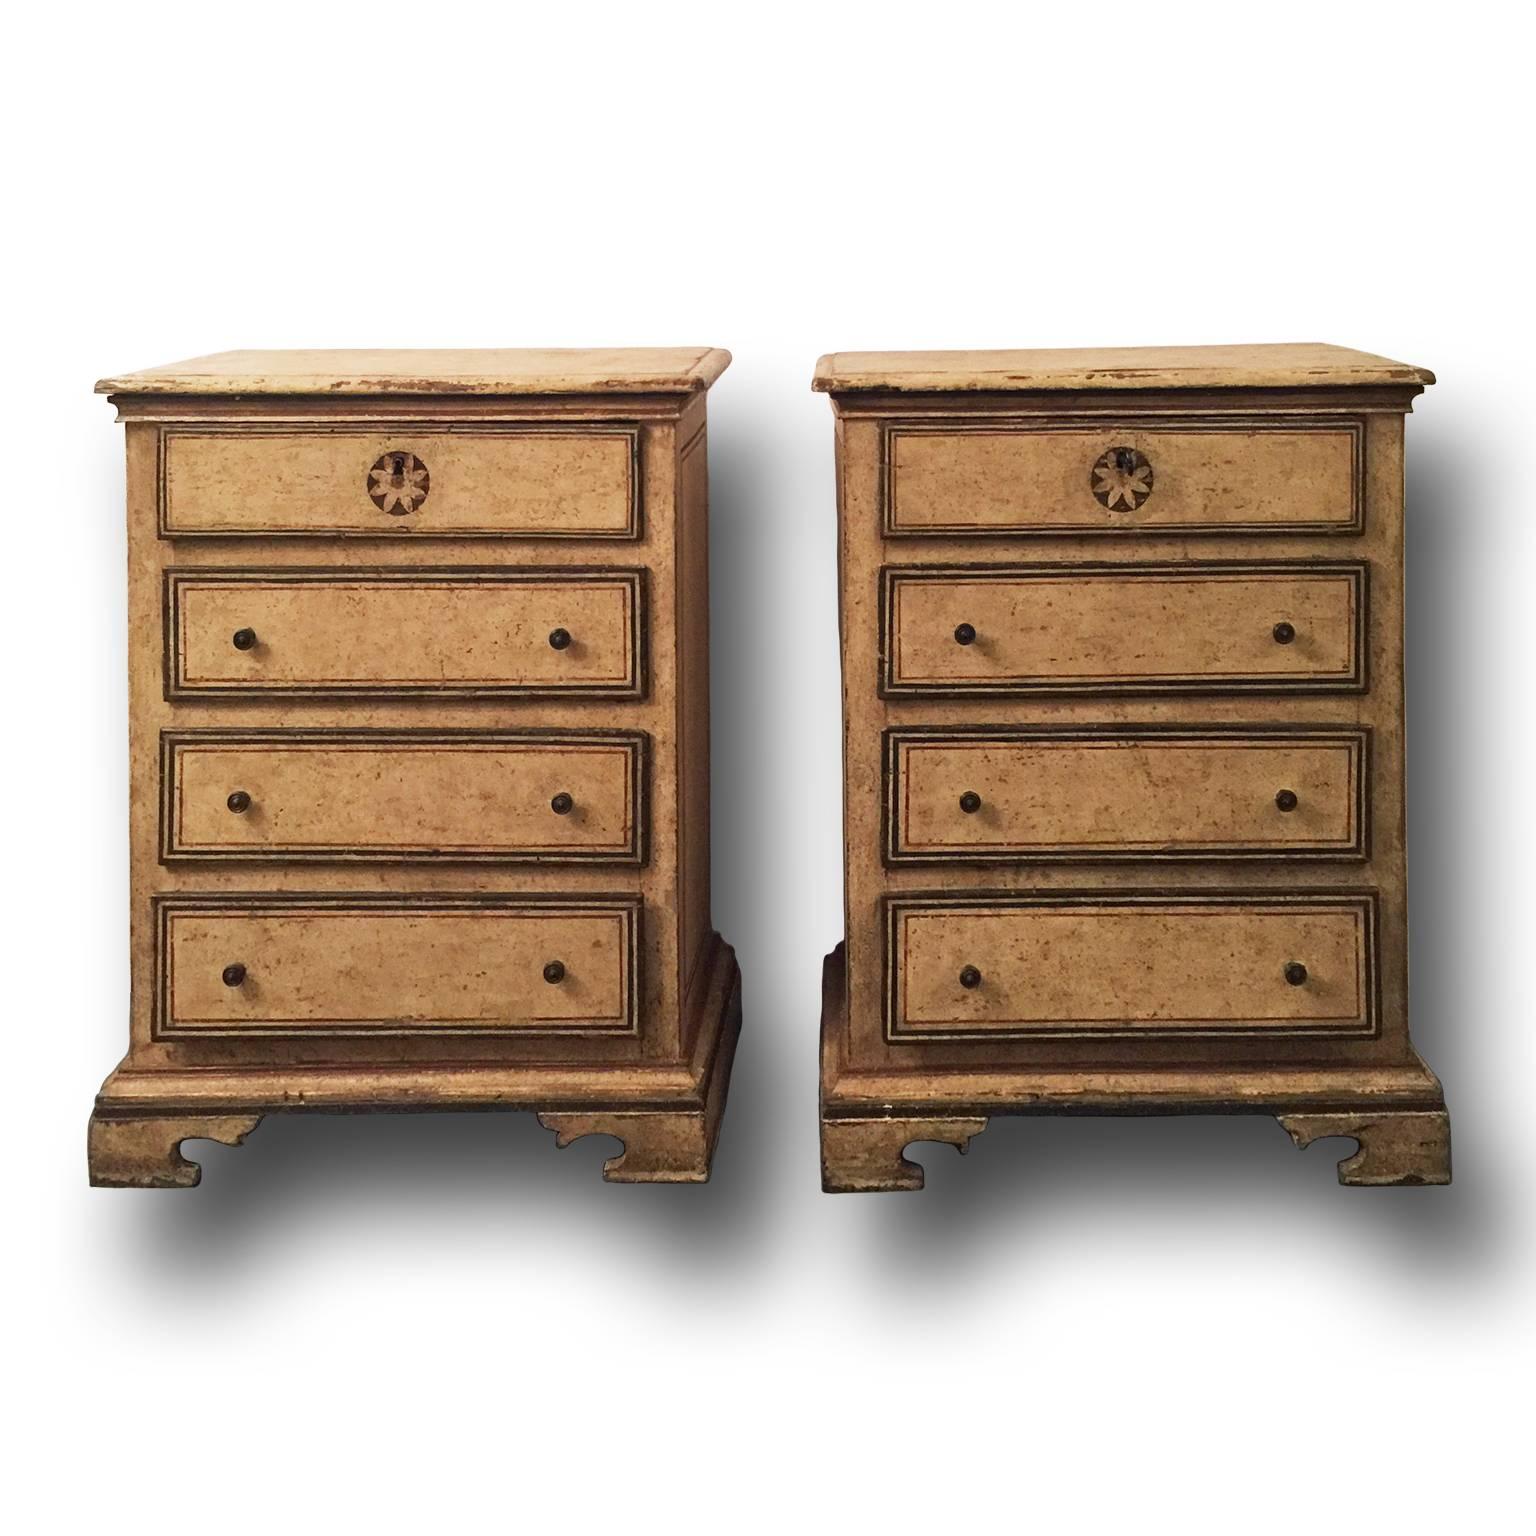 A charming pair of Italian Louis XIV chests of drawers. The chests are made of solid pine wood and present four small drawers each. Both chests present a beautiful painted decoration, which has been added in a later period. Central Italy, Louis XIV,